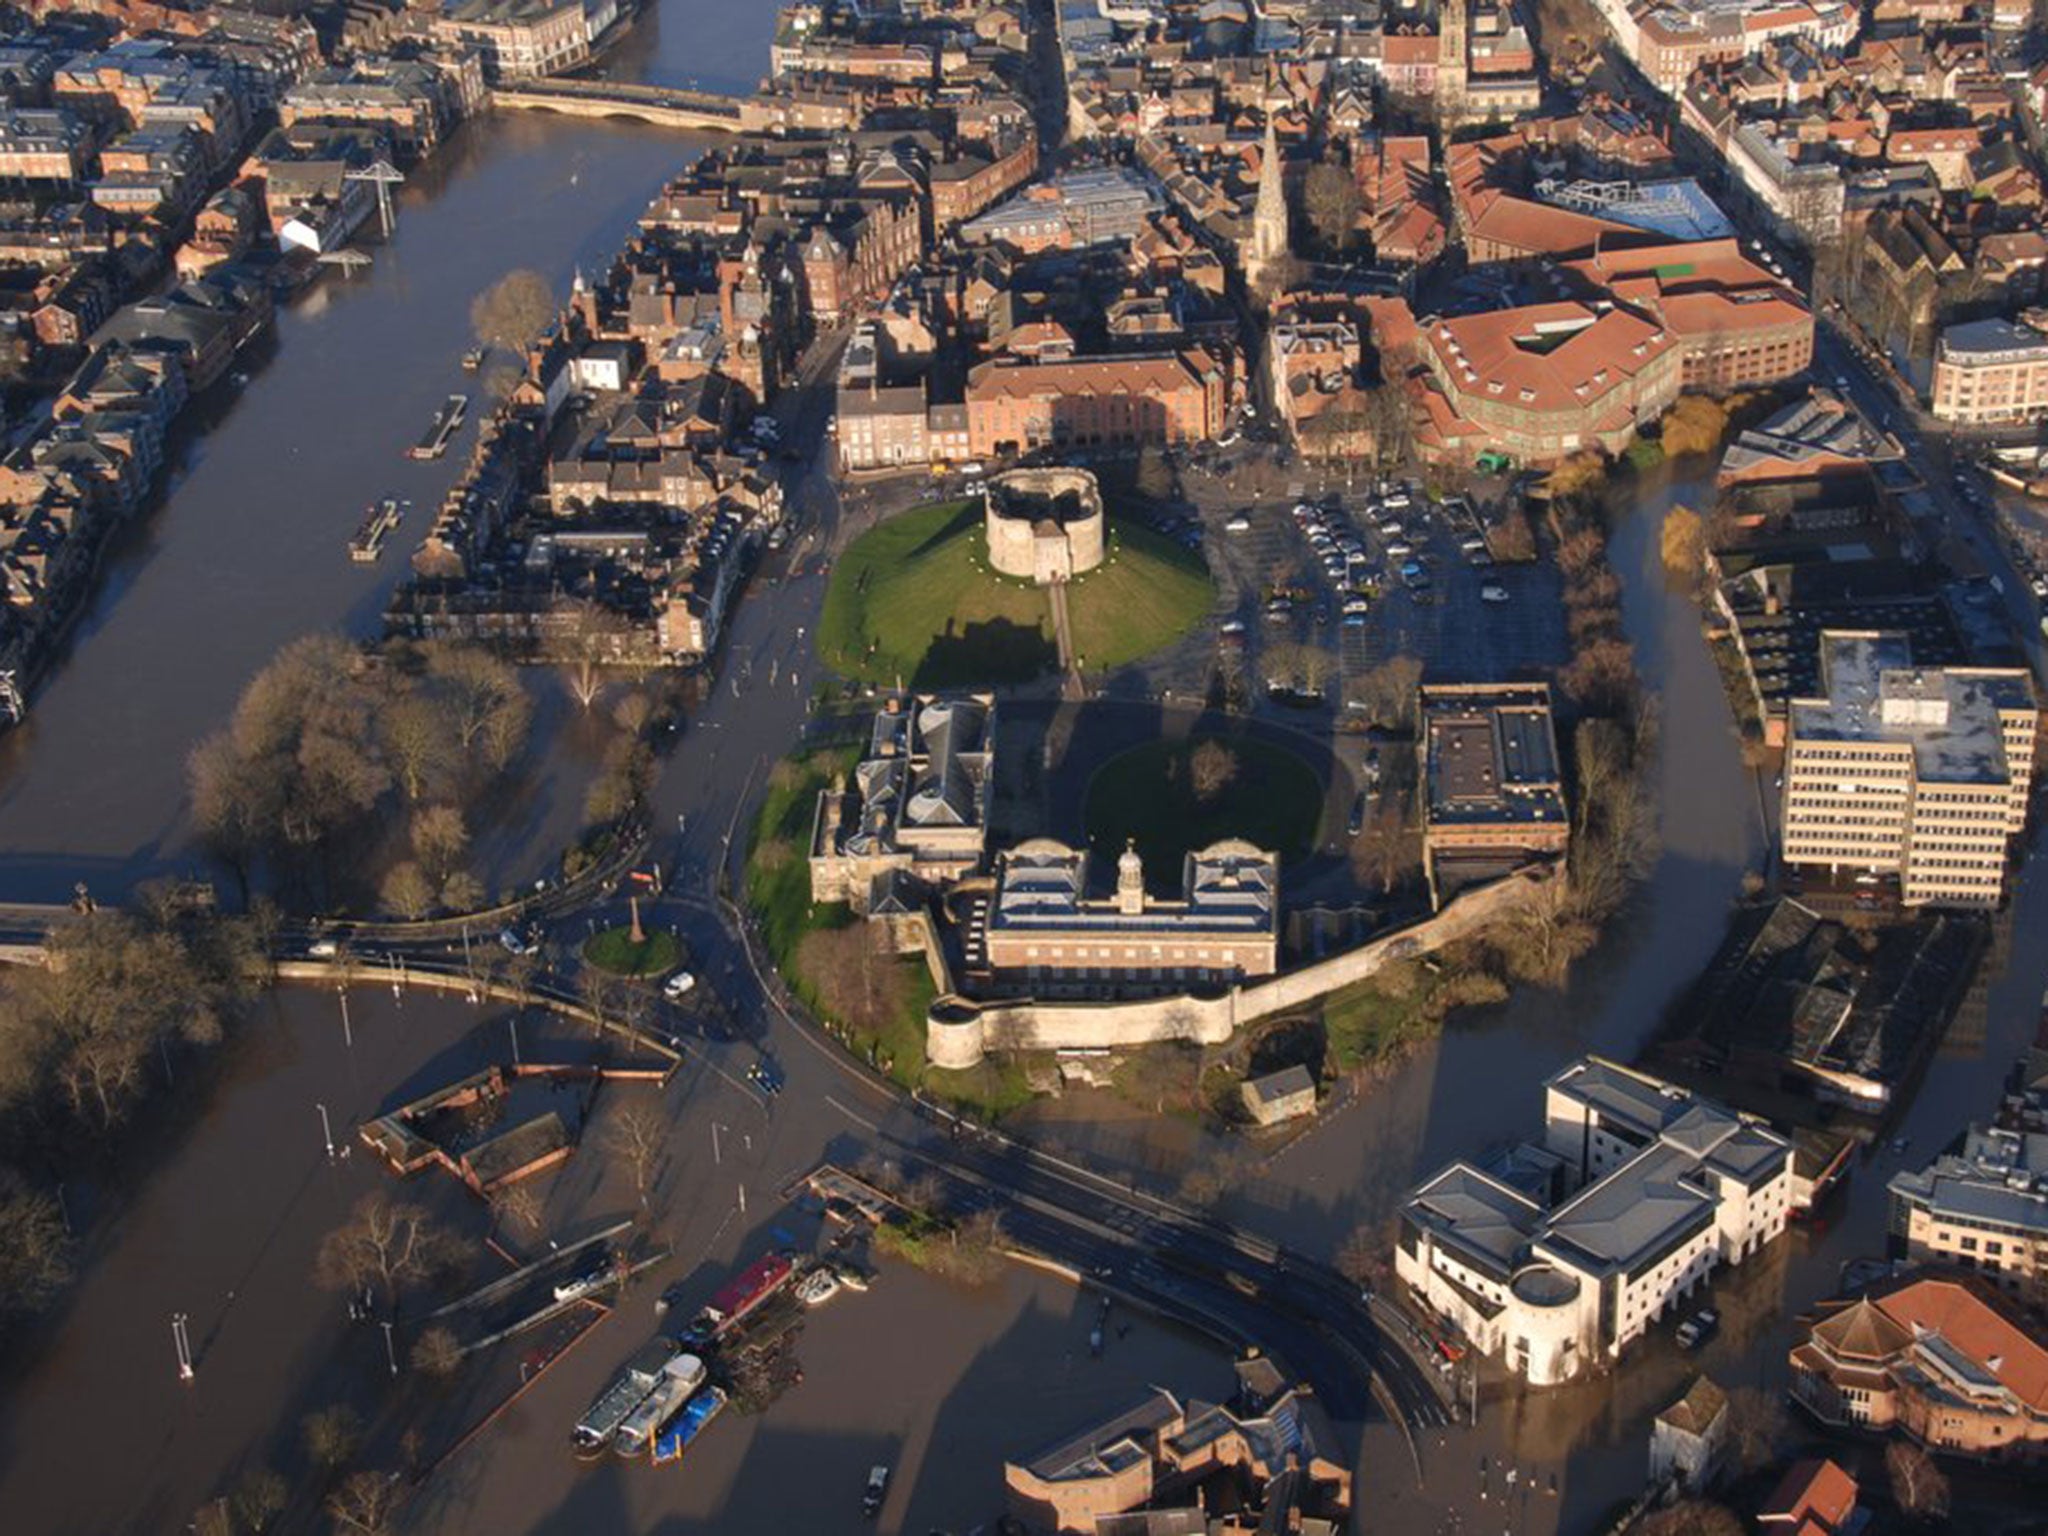 A police helicopter photographed the extent of the flooding in York on 27 December.